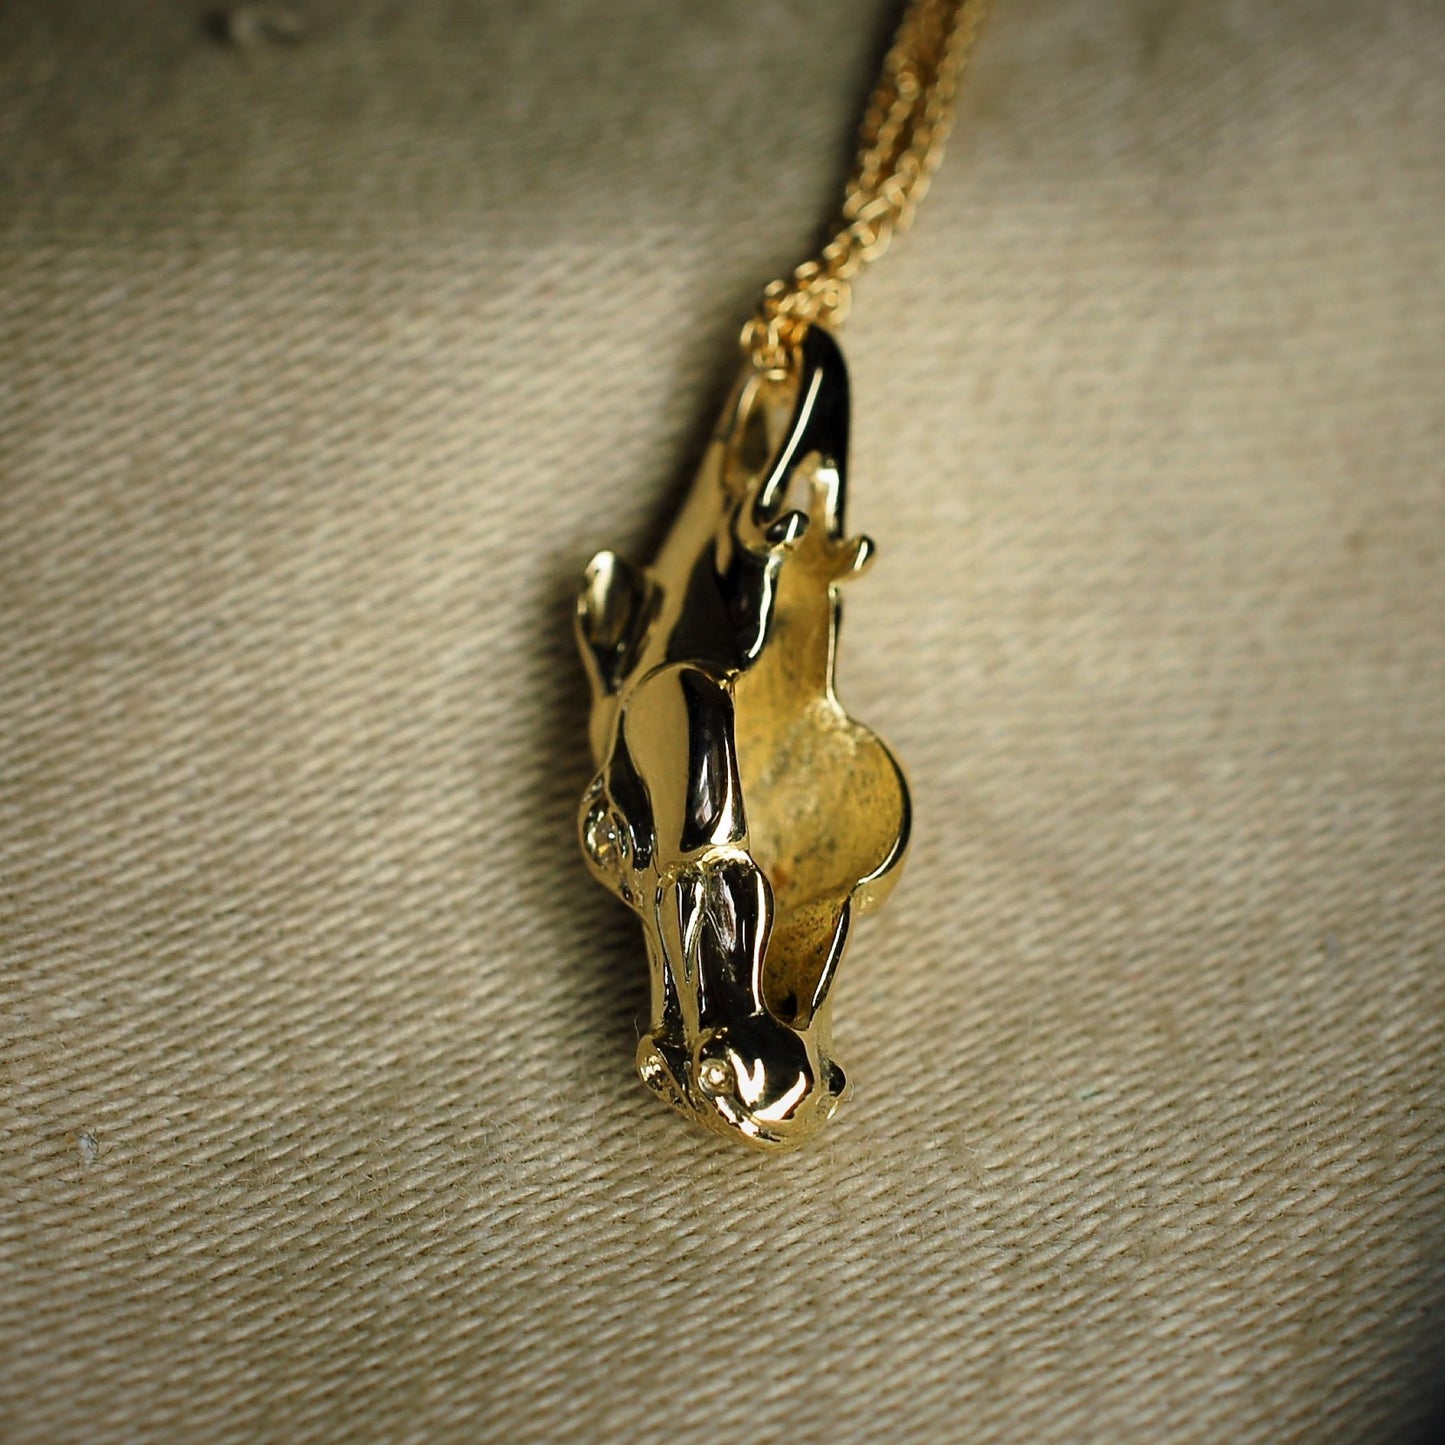 Gold horse necklace, horse head pendant. Diamond eyed equestrian jewellery on a gold chain. Made to order. © Adrian Ashley